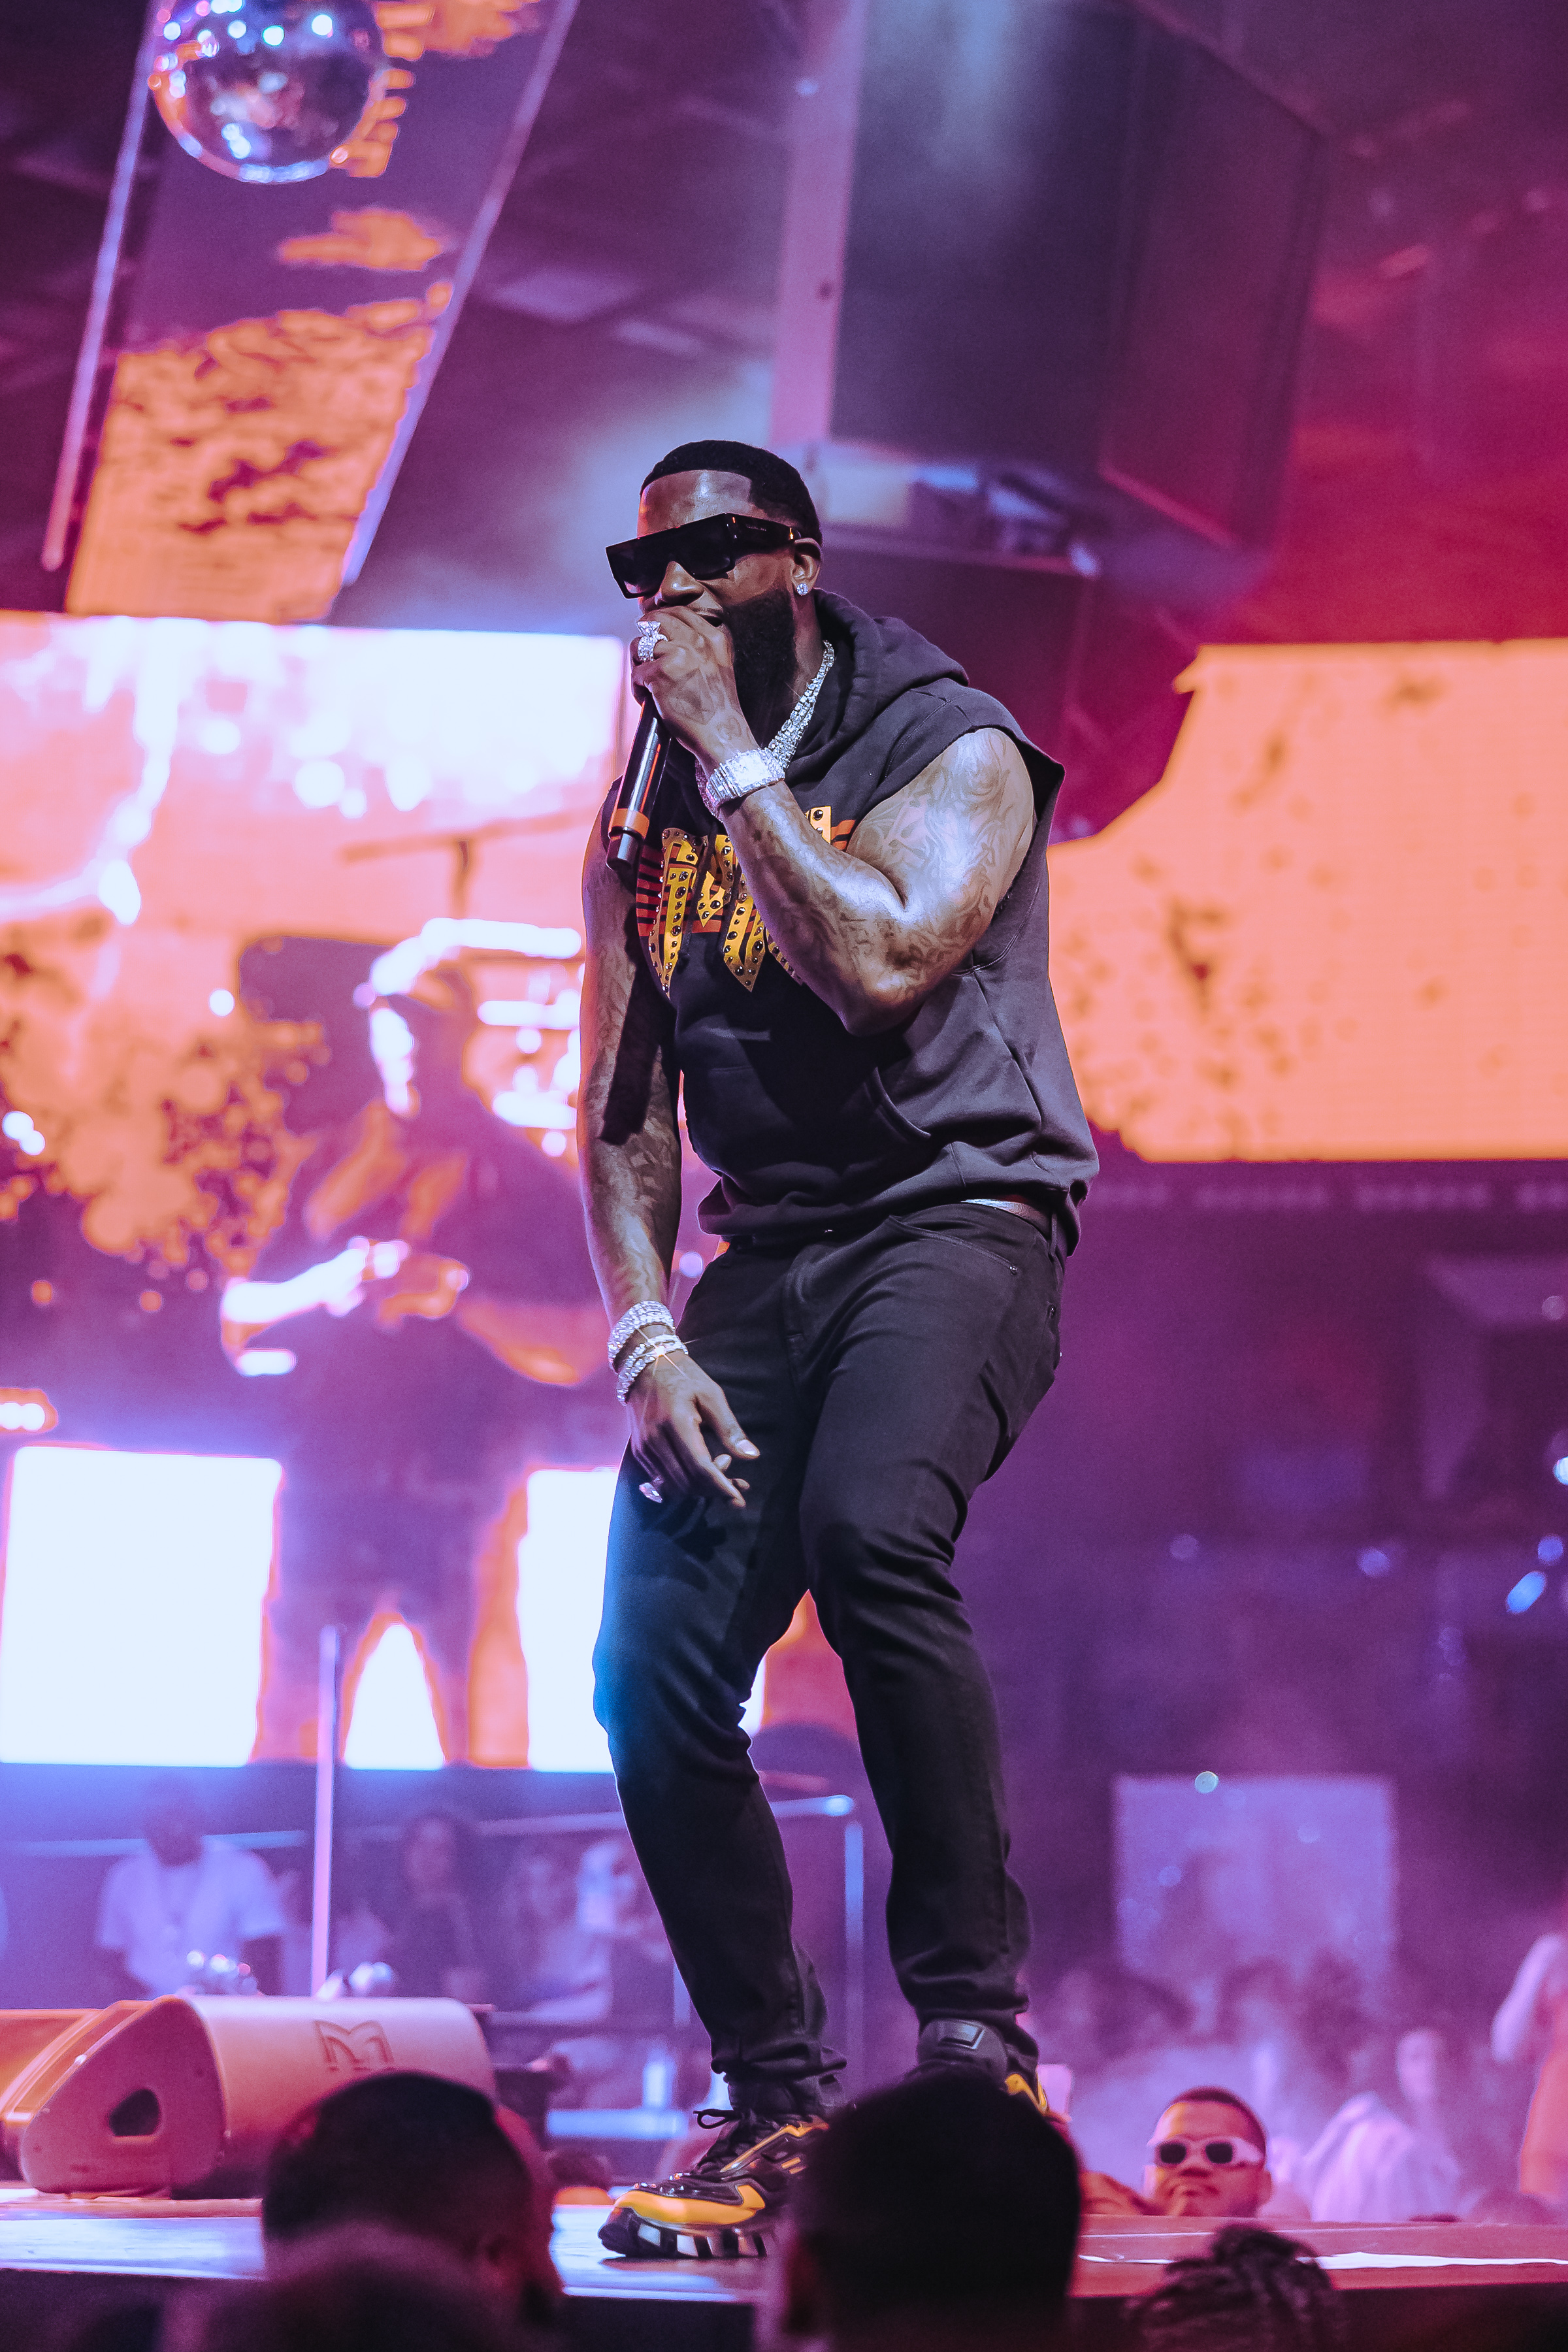 Gucci Mane took the stage to perform at Drai's Nightclub on April 27